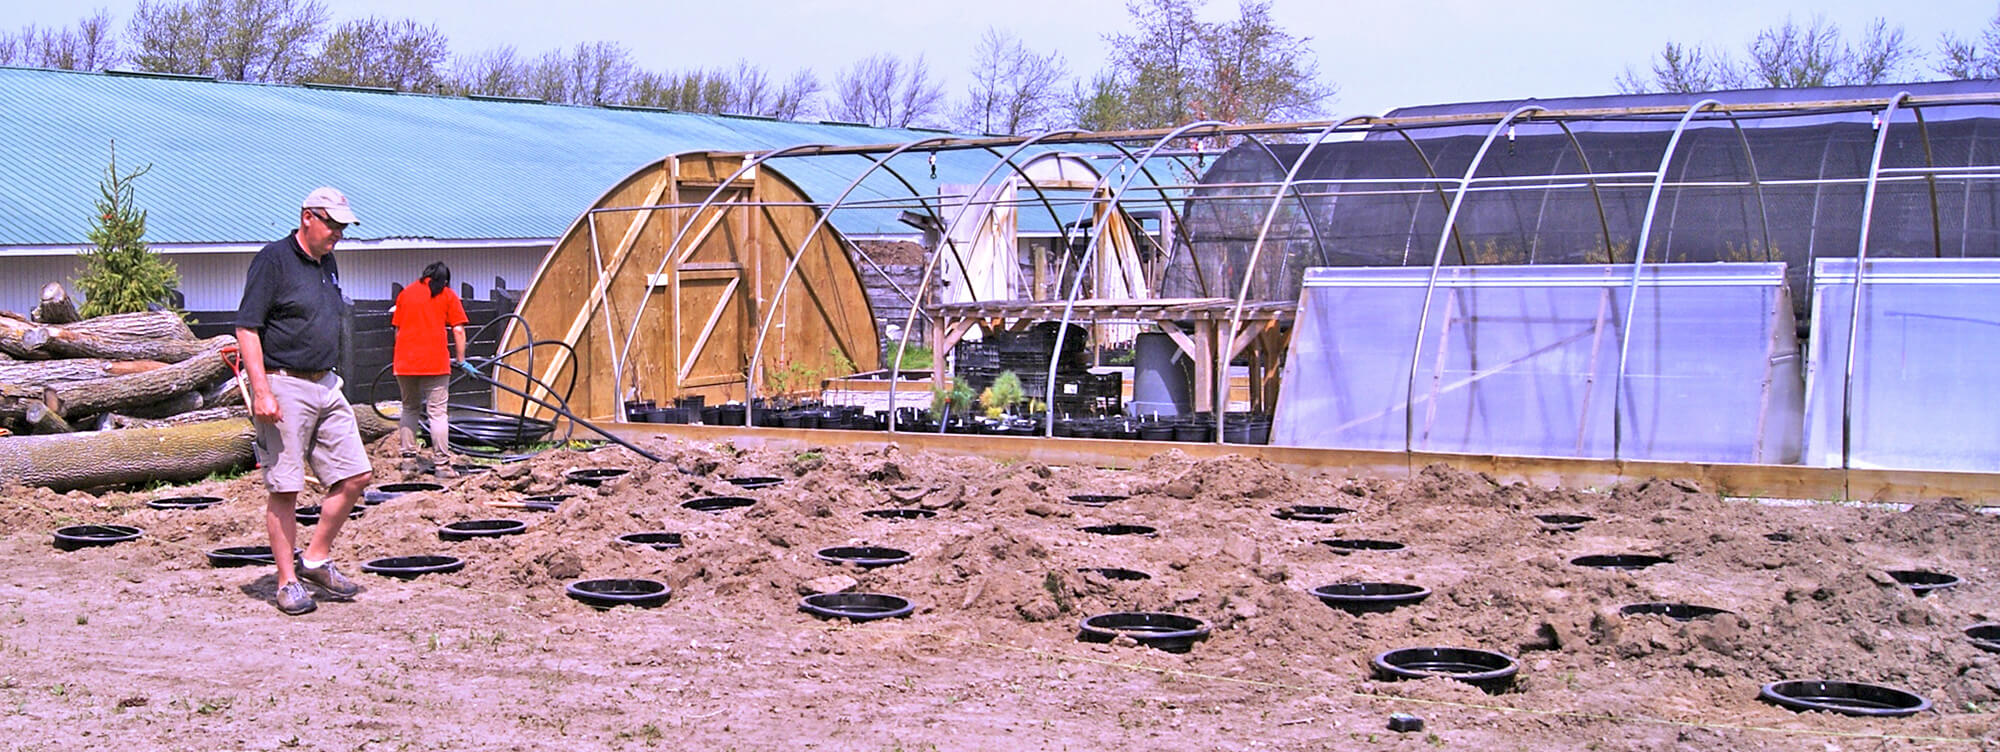 hoop house with pots in the ground beside it